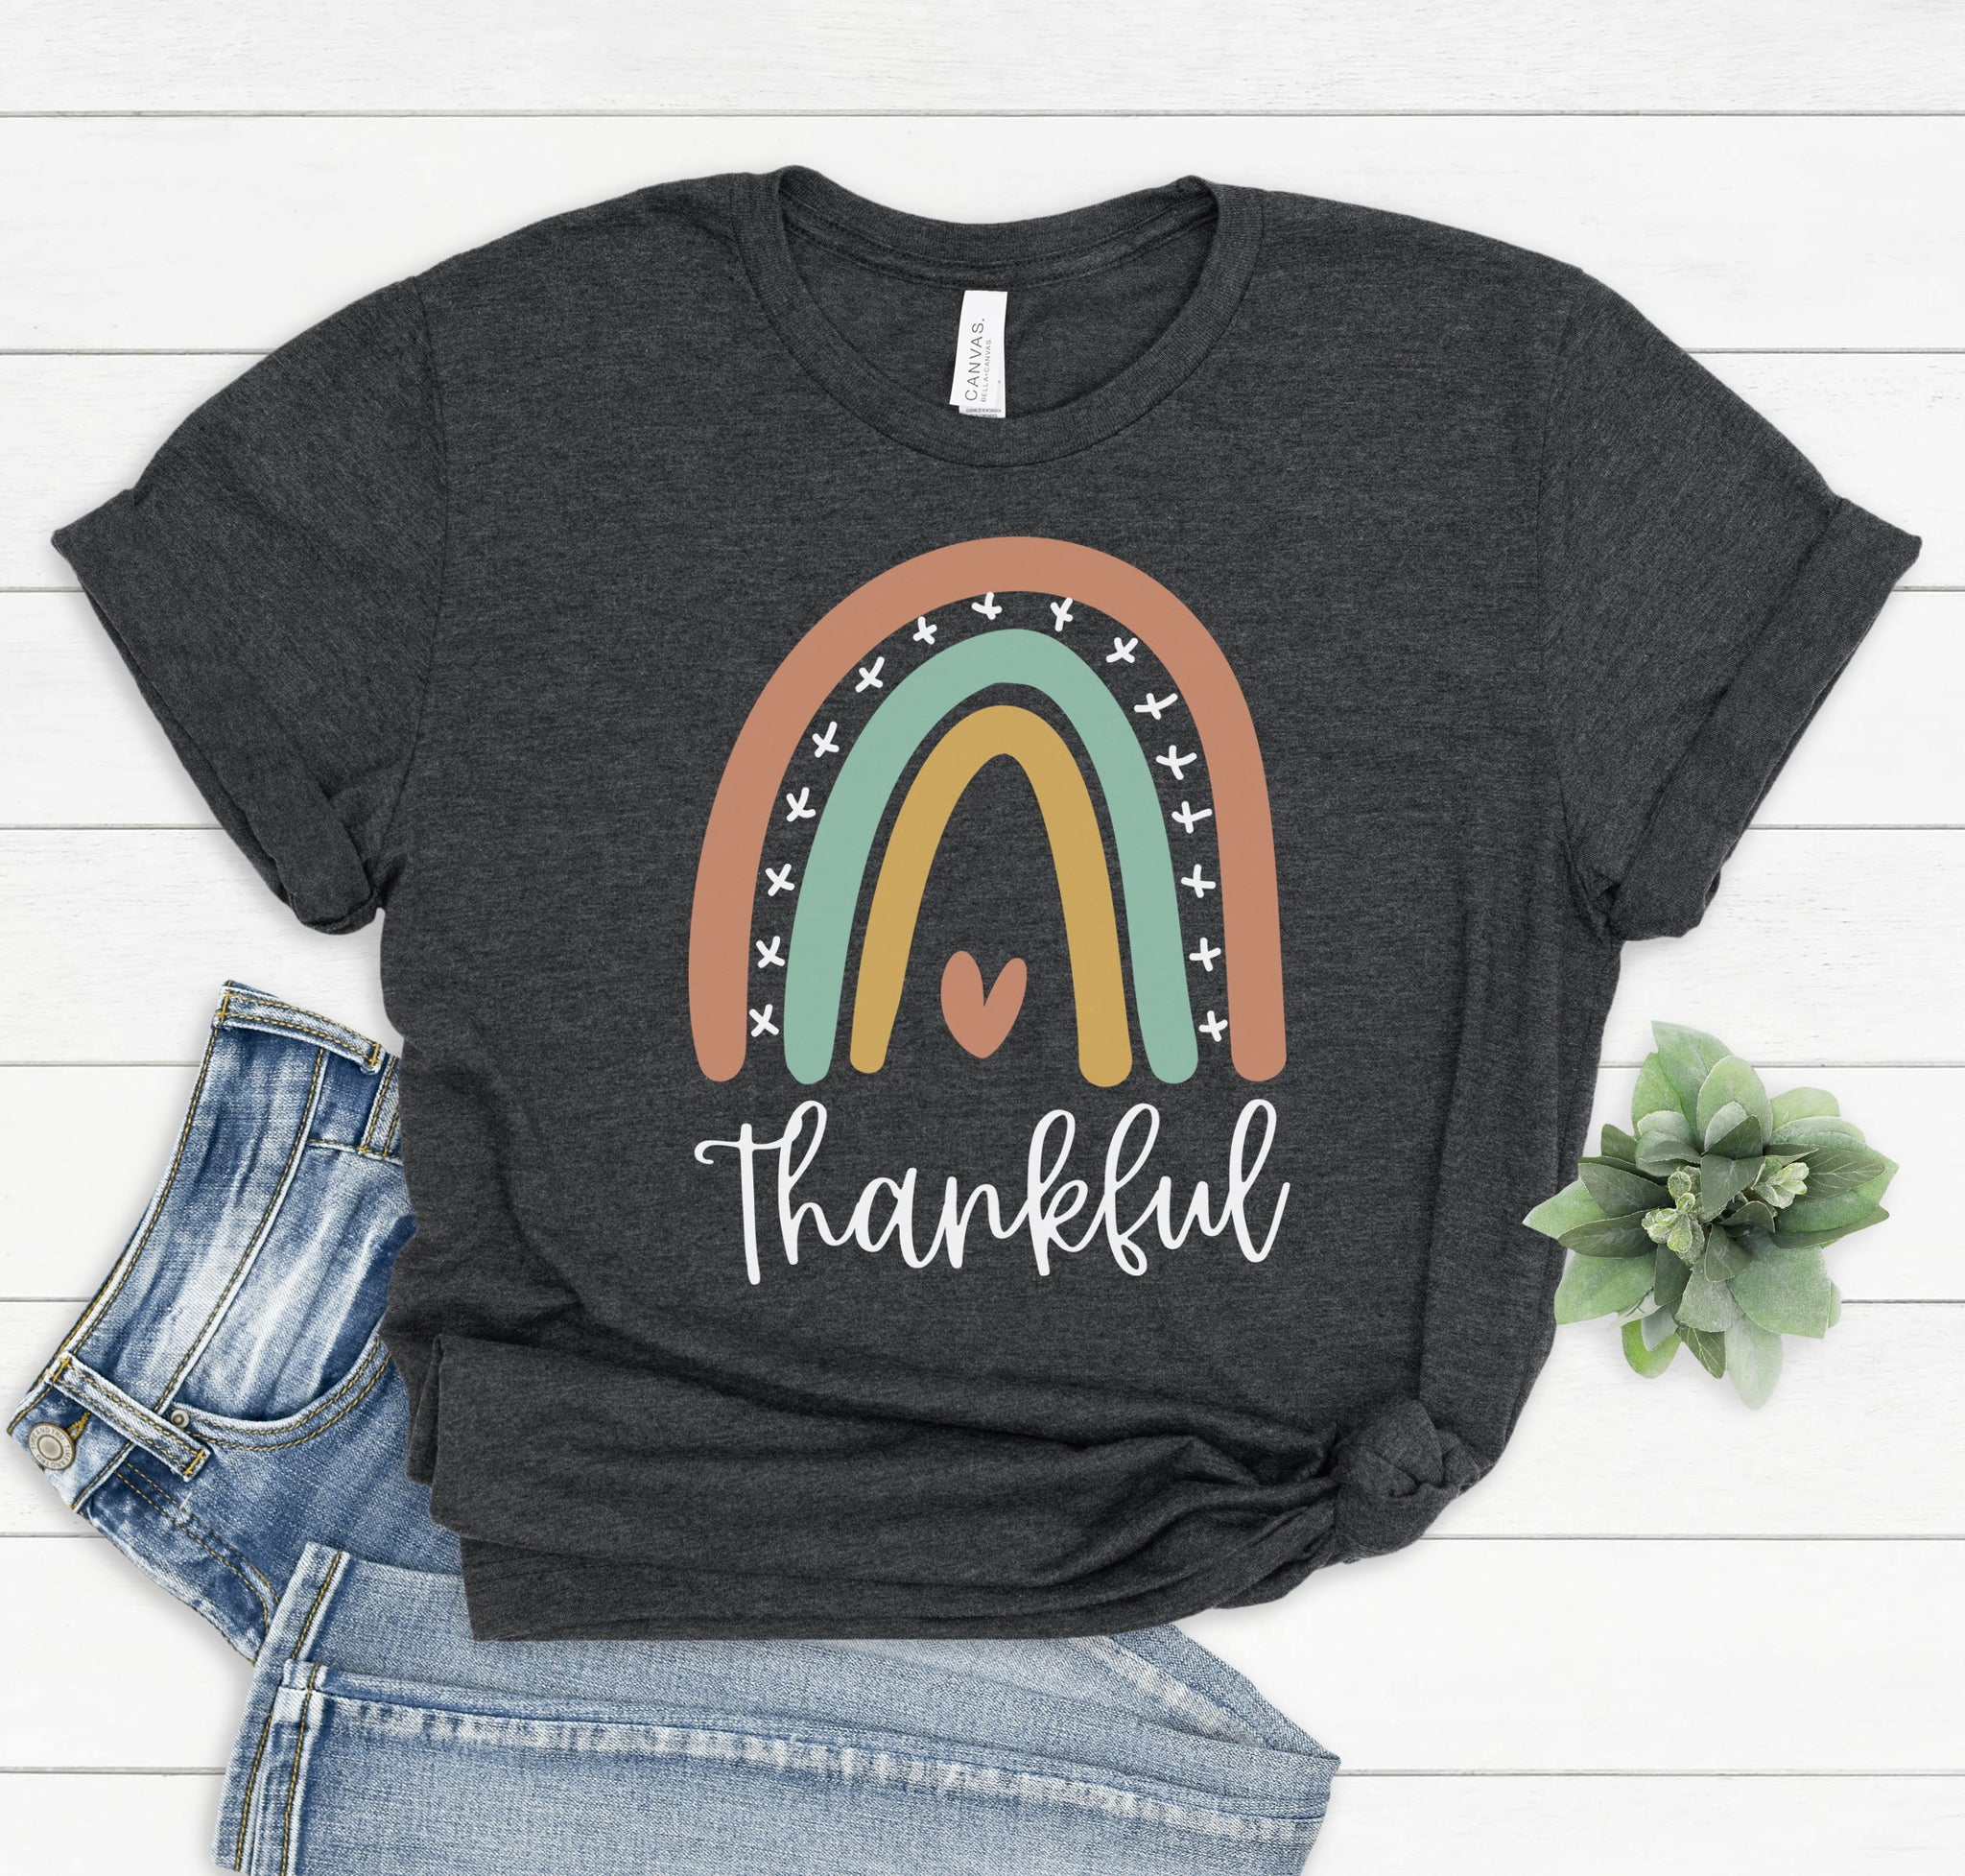 Girls youth graphic t-shirt for fall with a cute rainbow doodle and the word "Thankful" on the front.